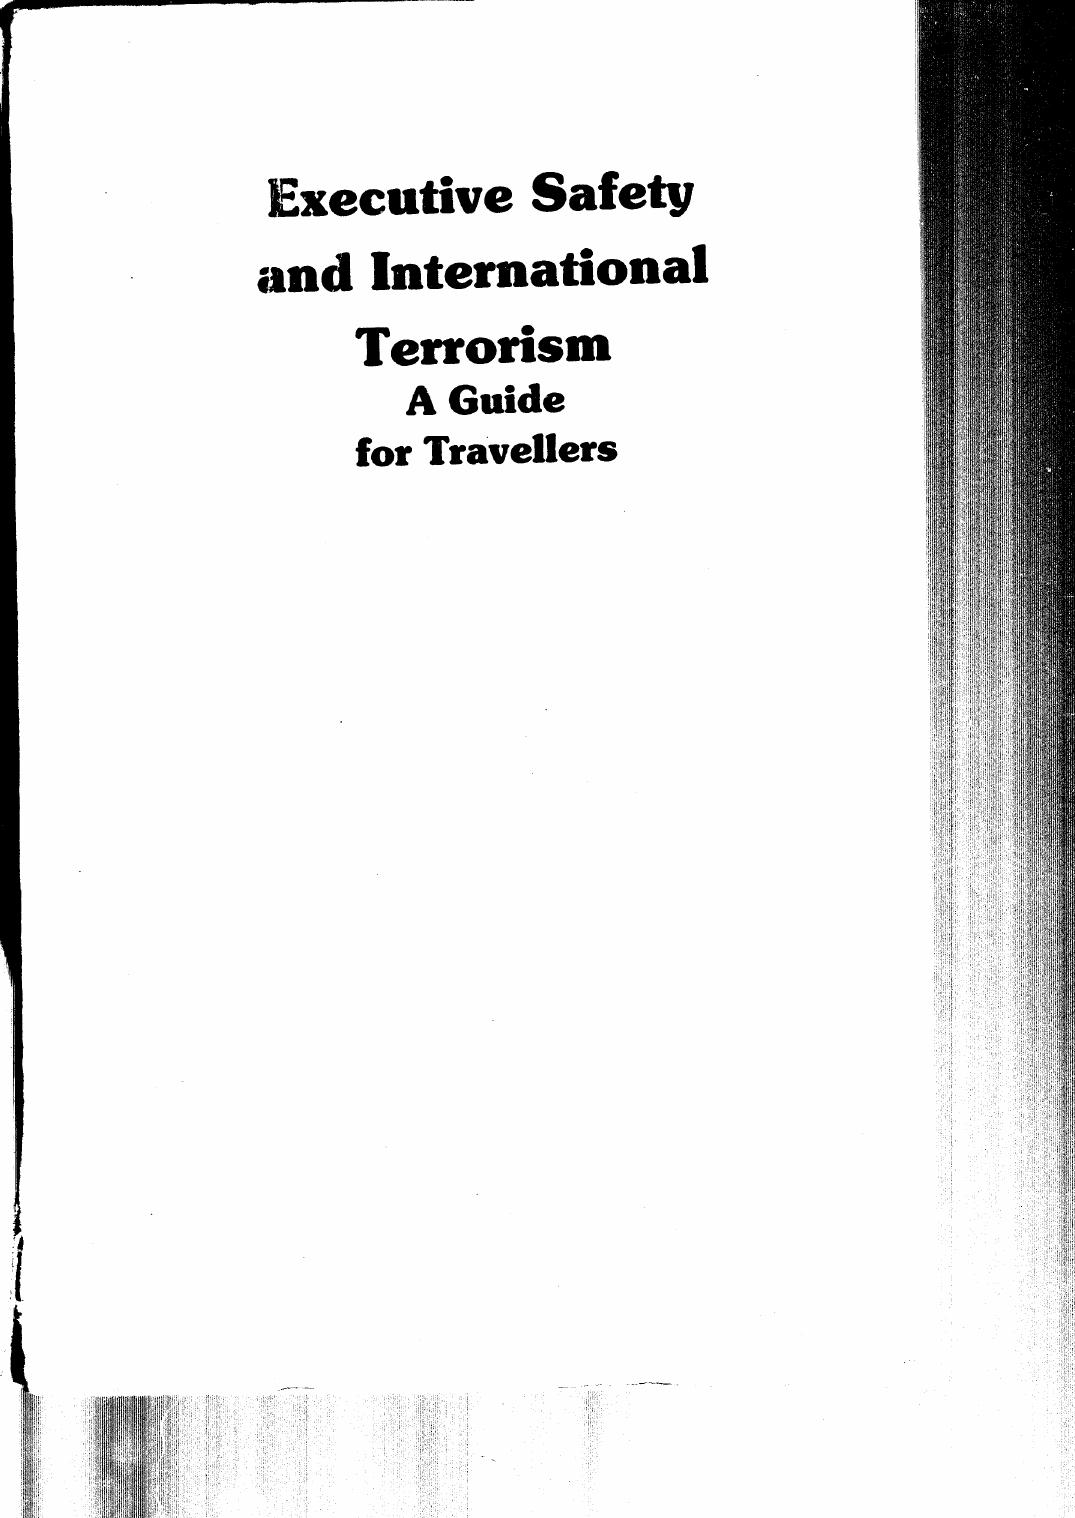 Executive Safety and International Terrorism - A Guide for Travellers by Anthony J. Scotti